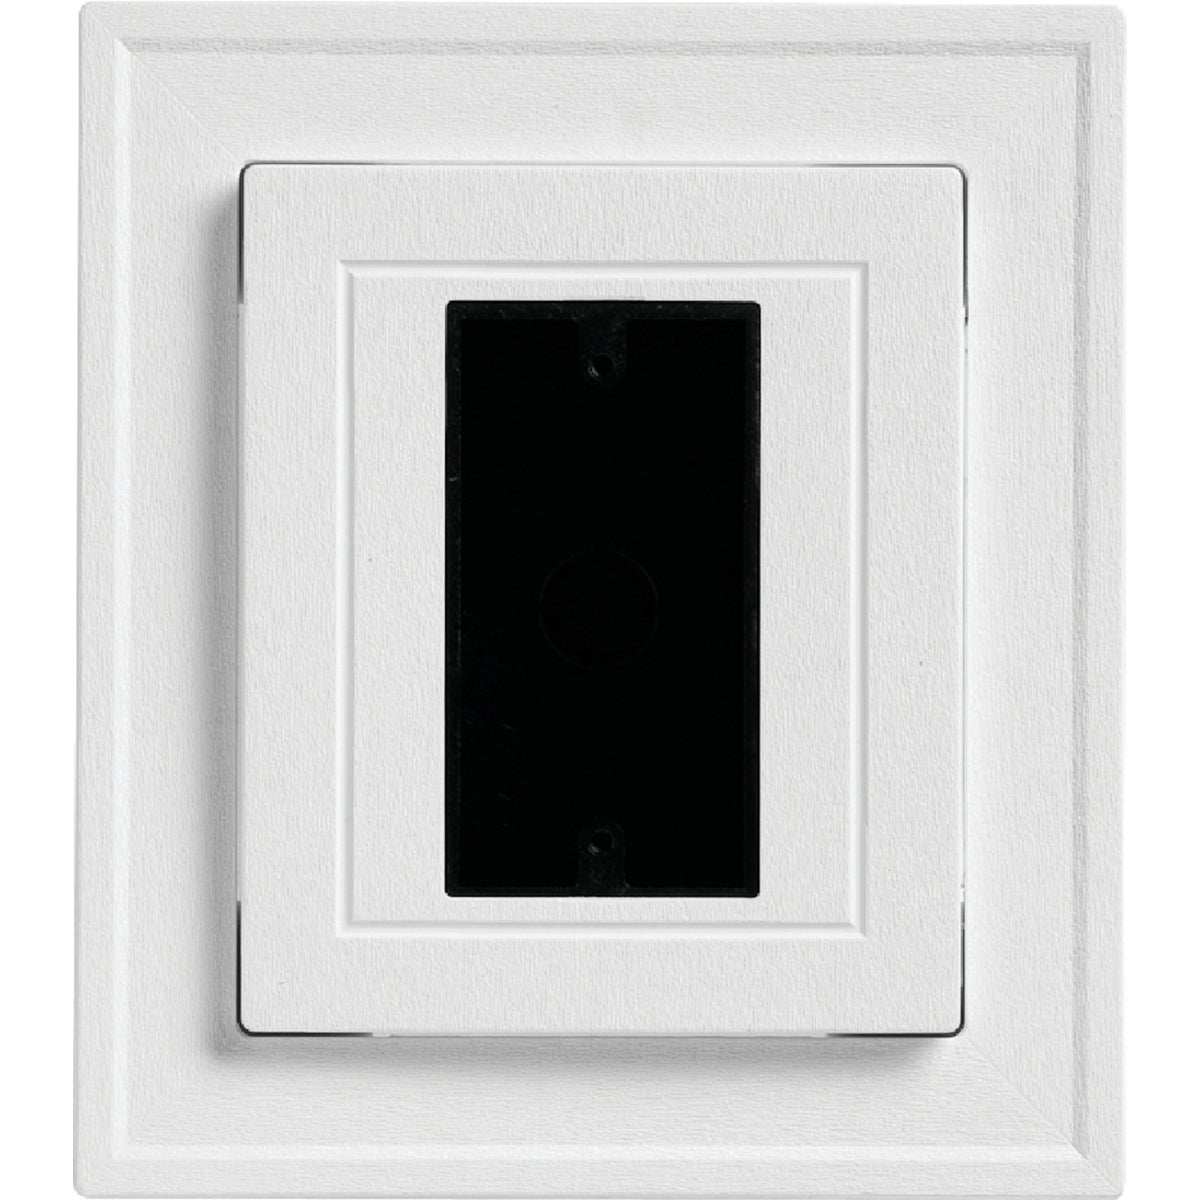 Item 122564, The UL electrical mounting block is designed to mount light fixtures or 